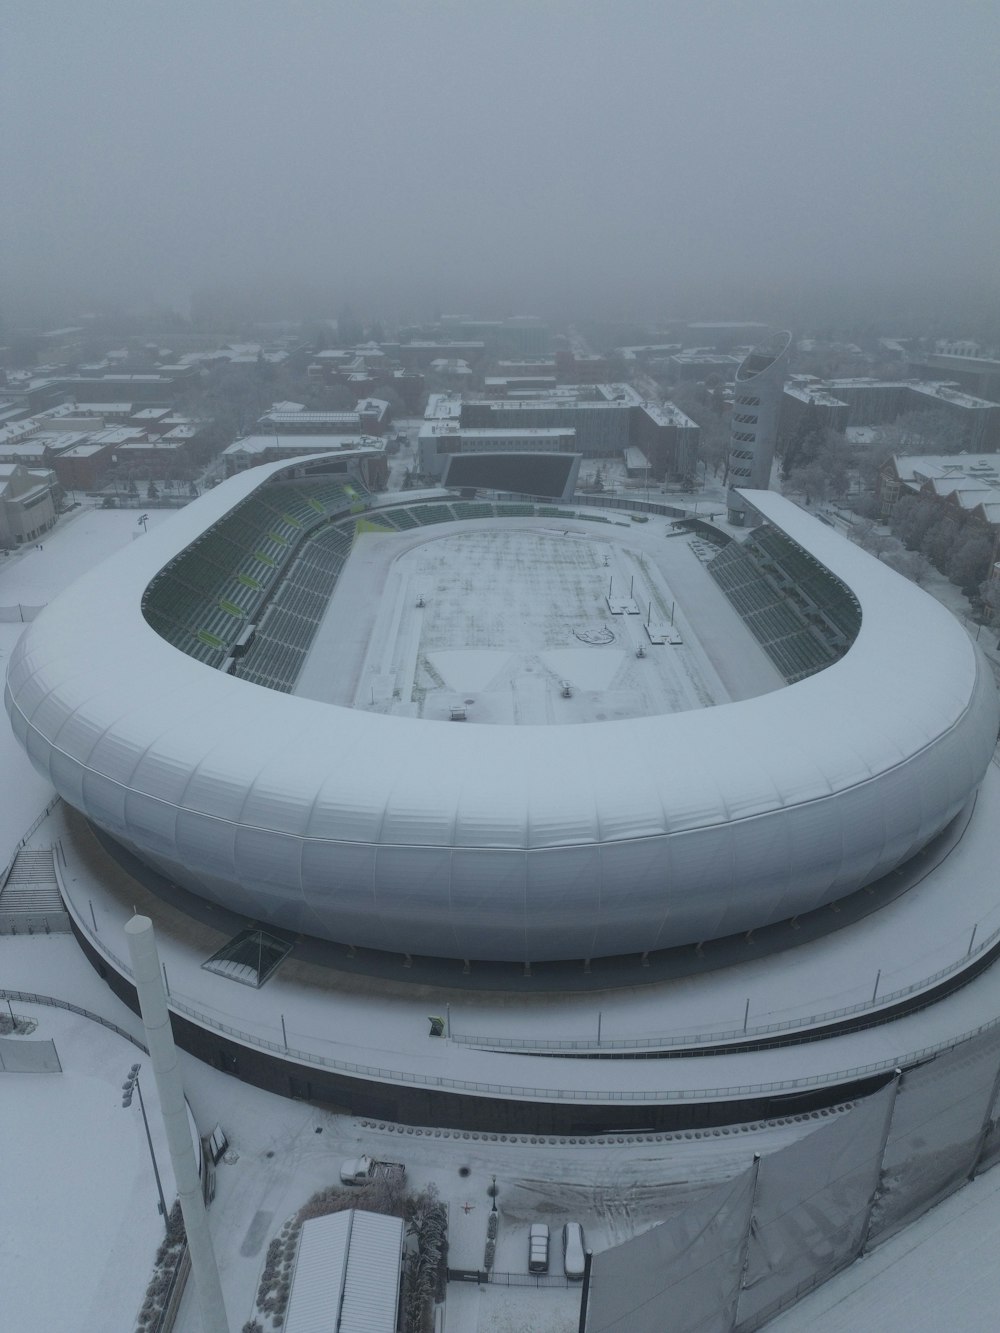 an aerial view of a snow covered stadium